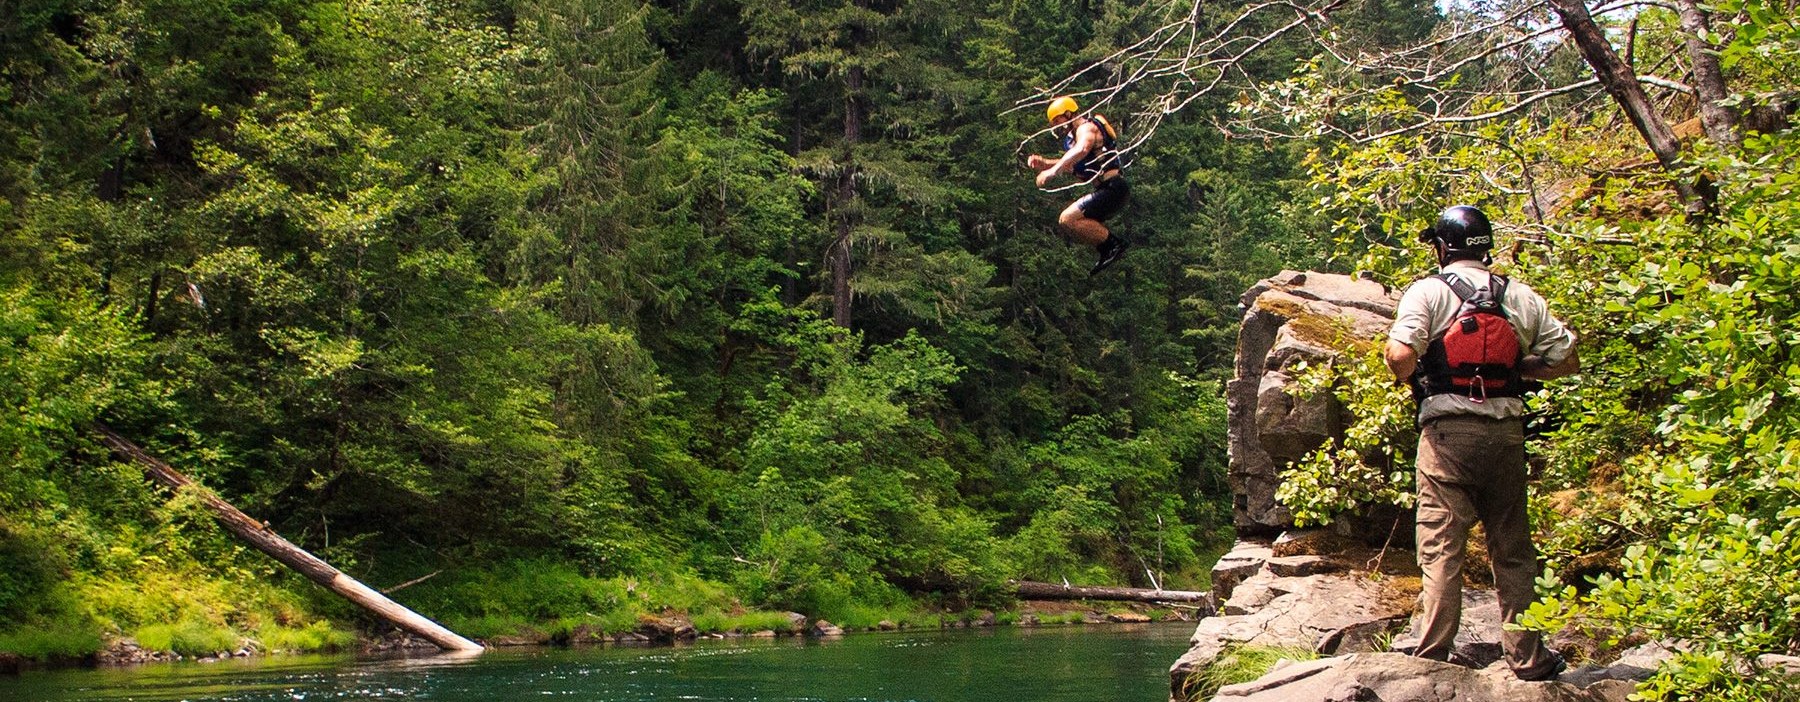 Jump-off rock.. At North Umpqua Outfitters